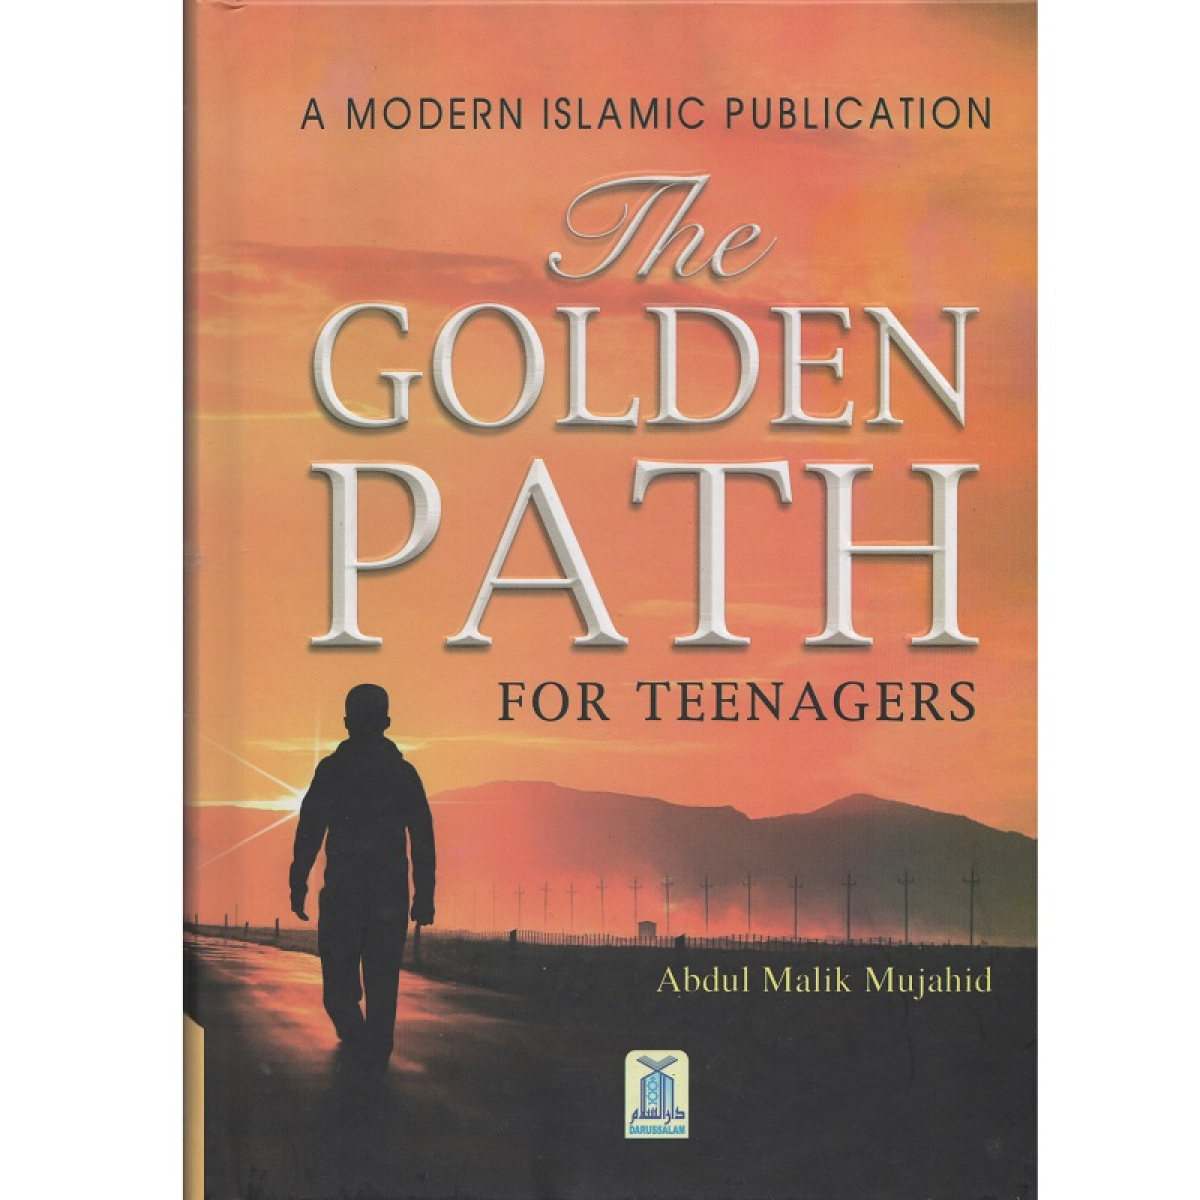 The Golden Path for Teenagers